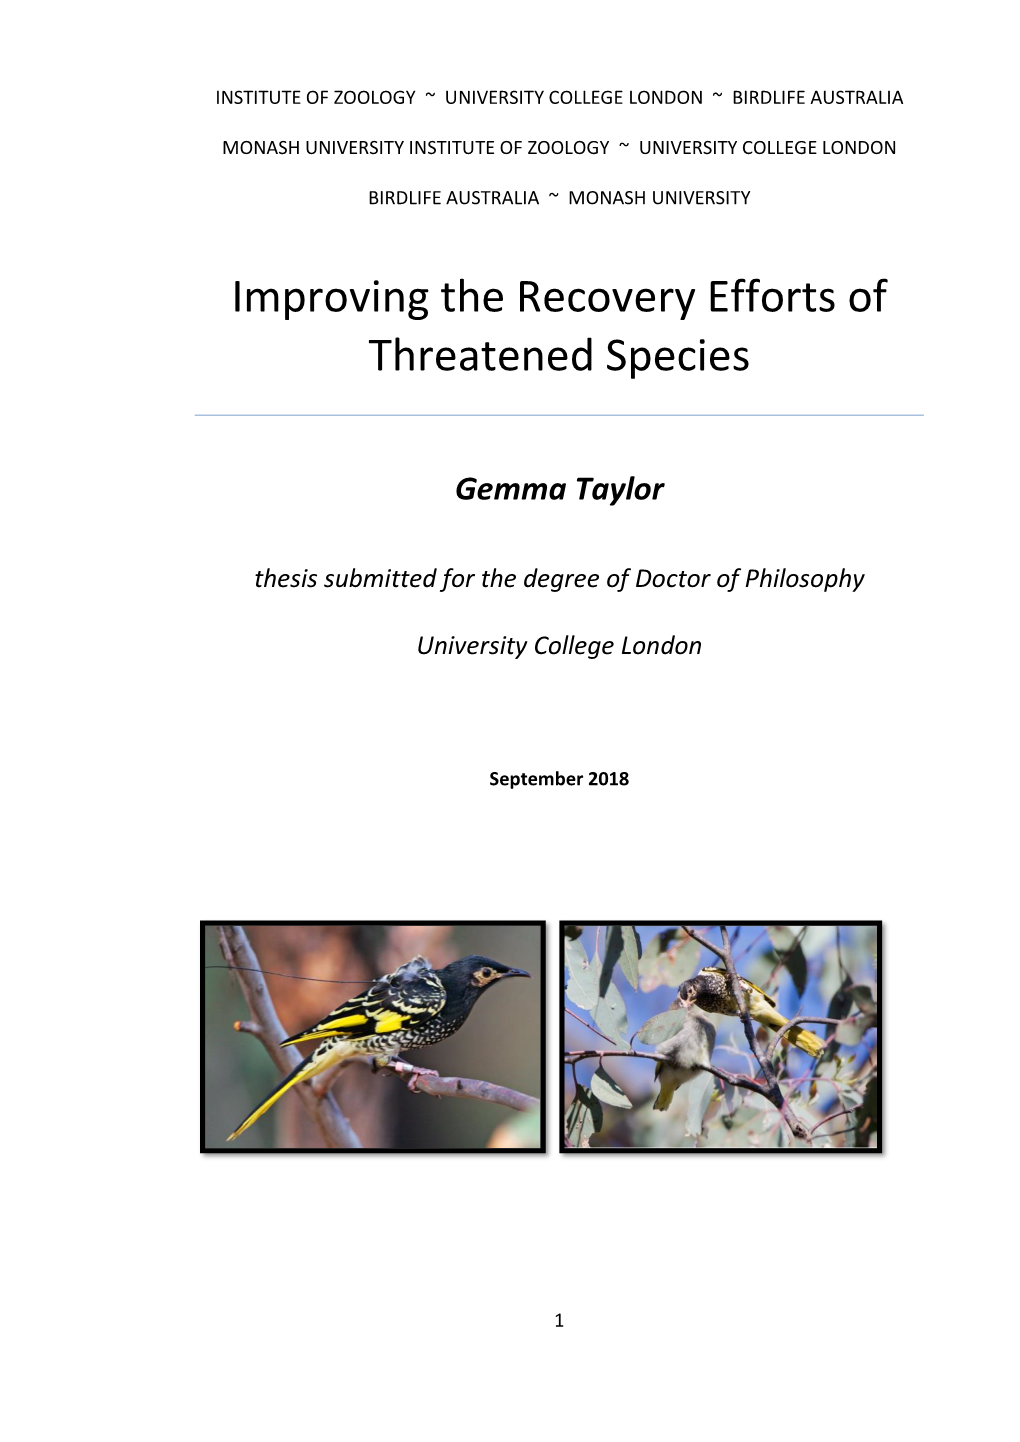 Improving the Recovery Efforts of Threatened Species